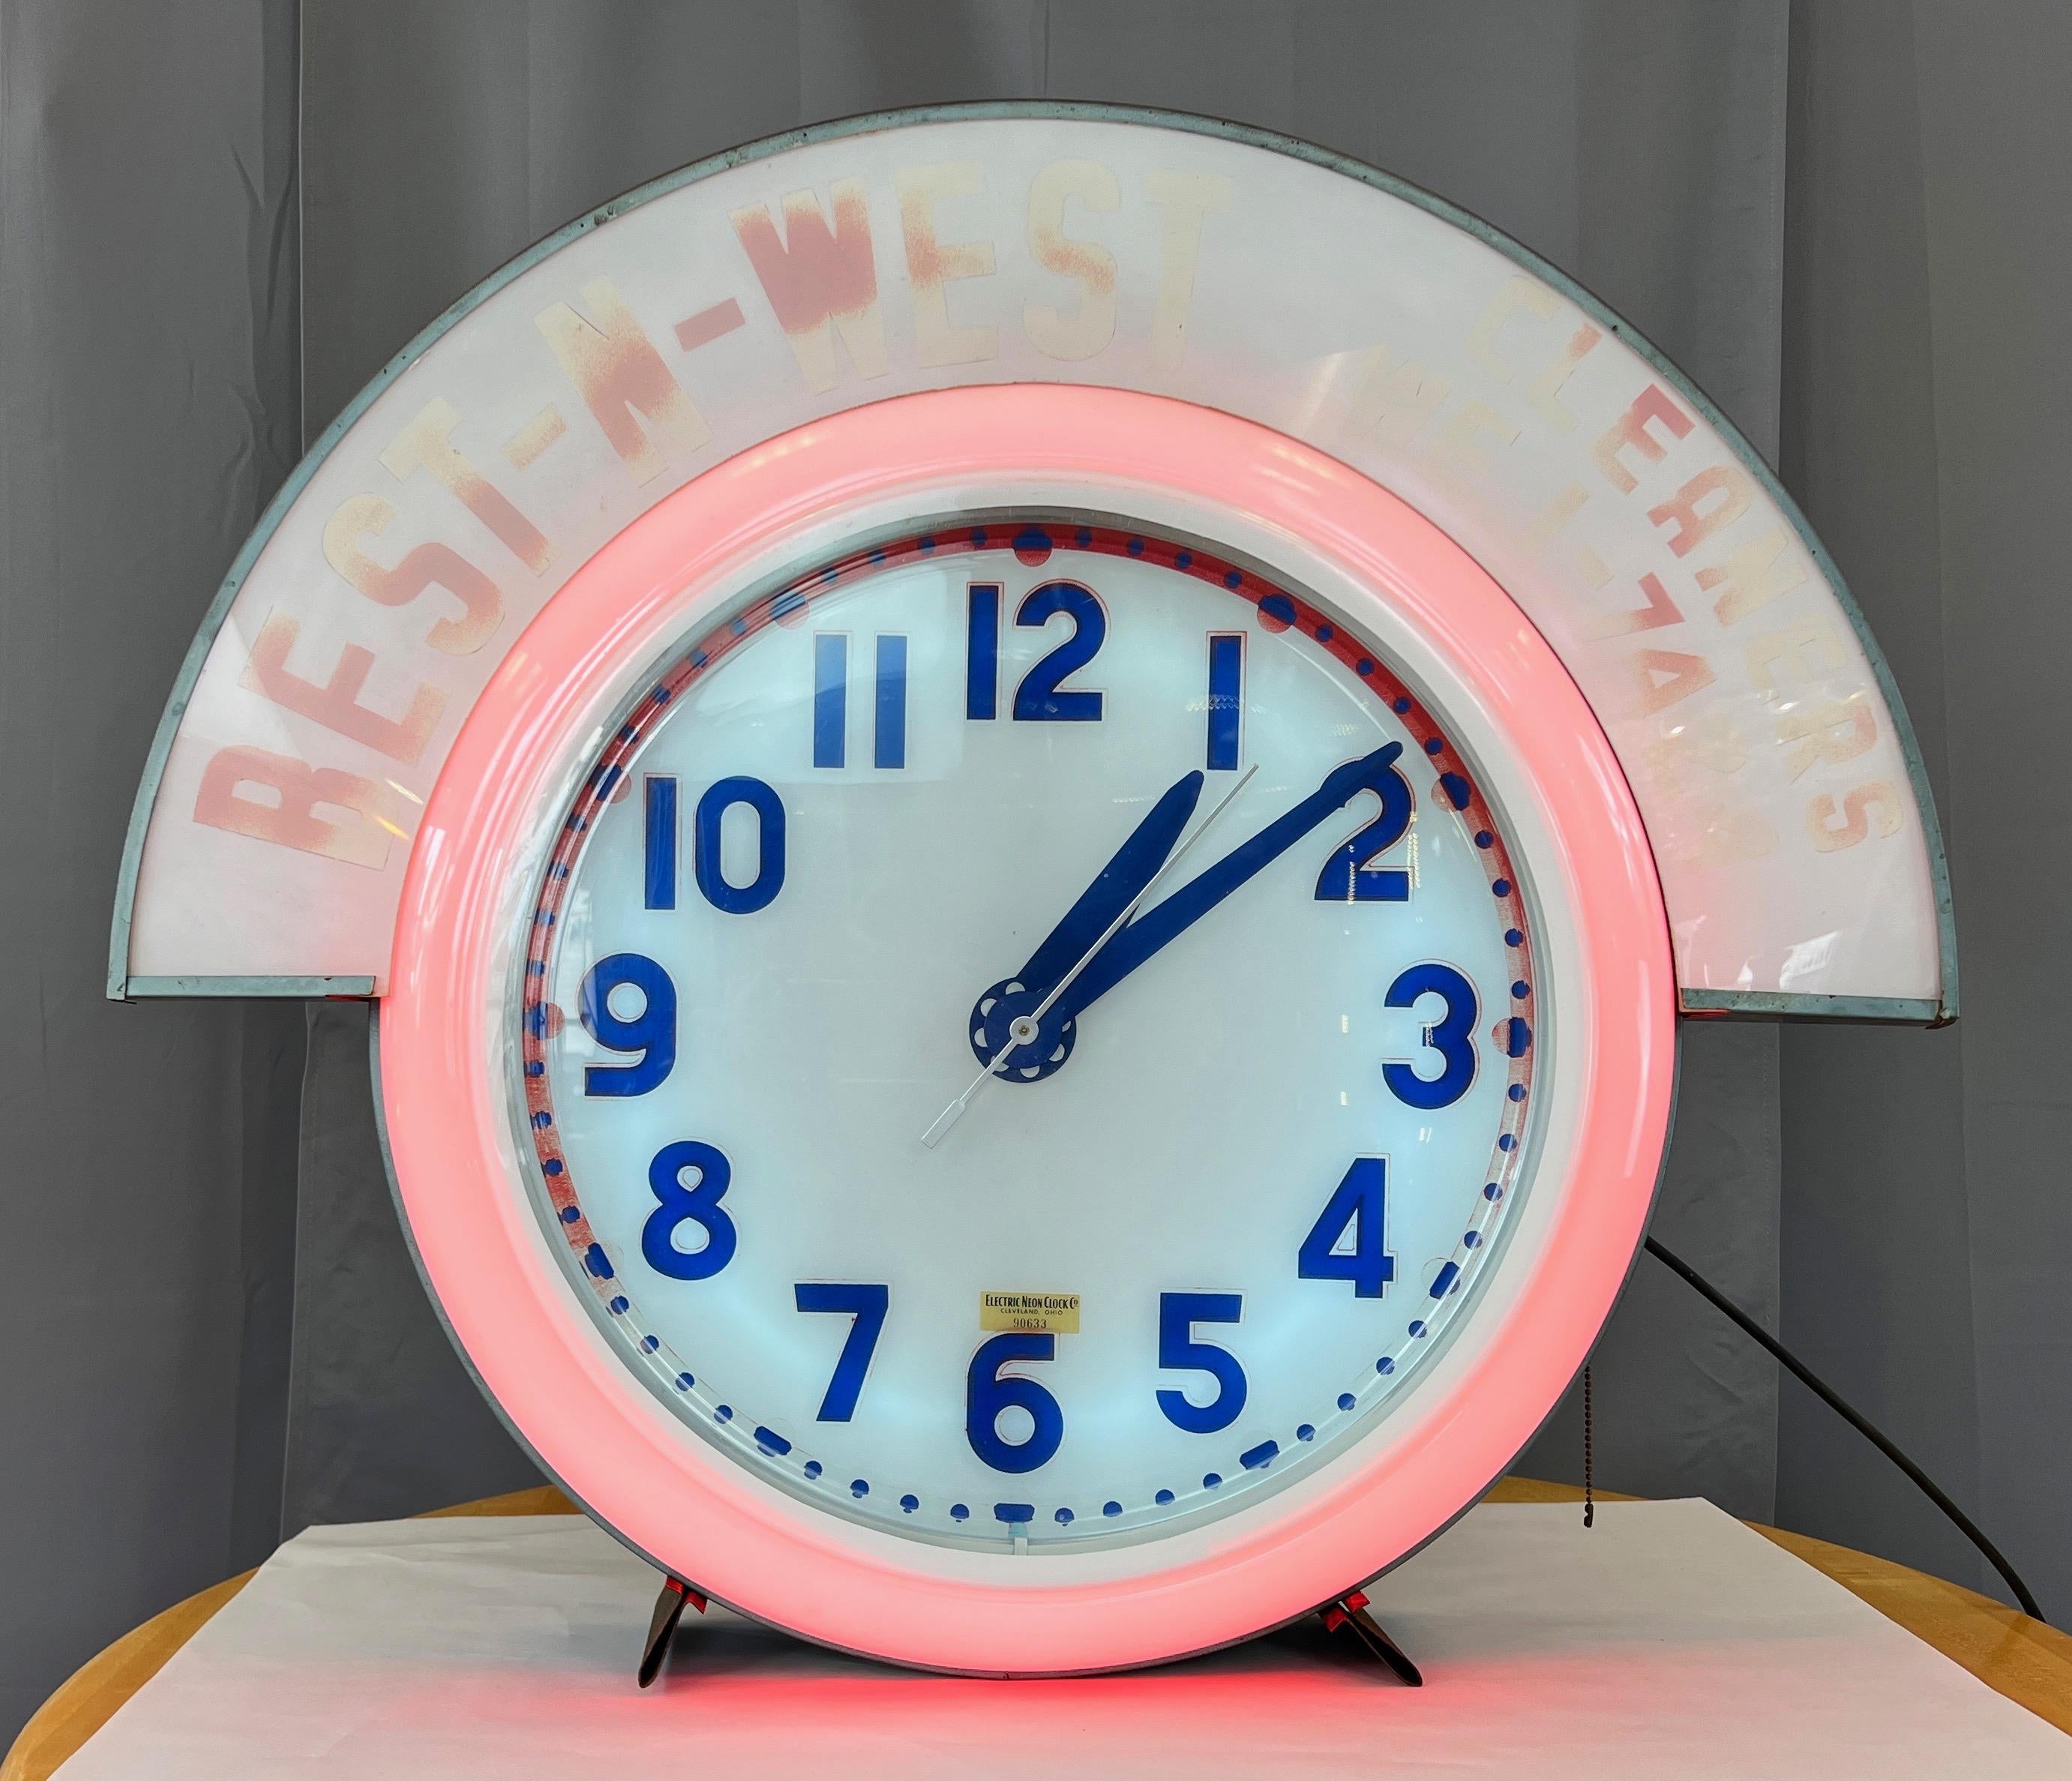 An extra-large and uncommon 1940s neon clock model APL-2 by the Electric Neon Clock Co. of Cleveland, Ohio, with very rare original advertising marquee for Best-N-West Cleaners of San Francisco, California.

Bright white plexiglass dial pan-style